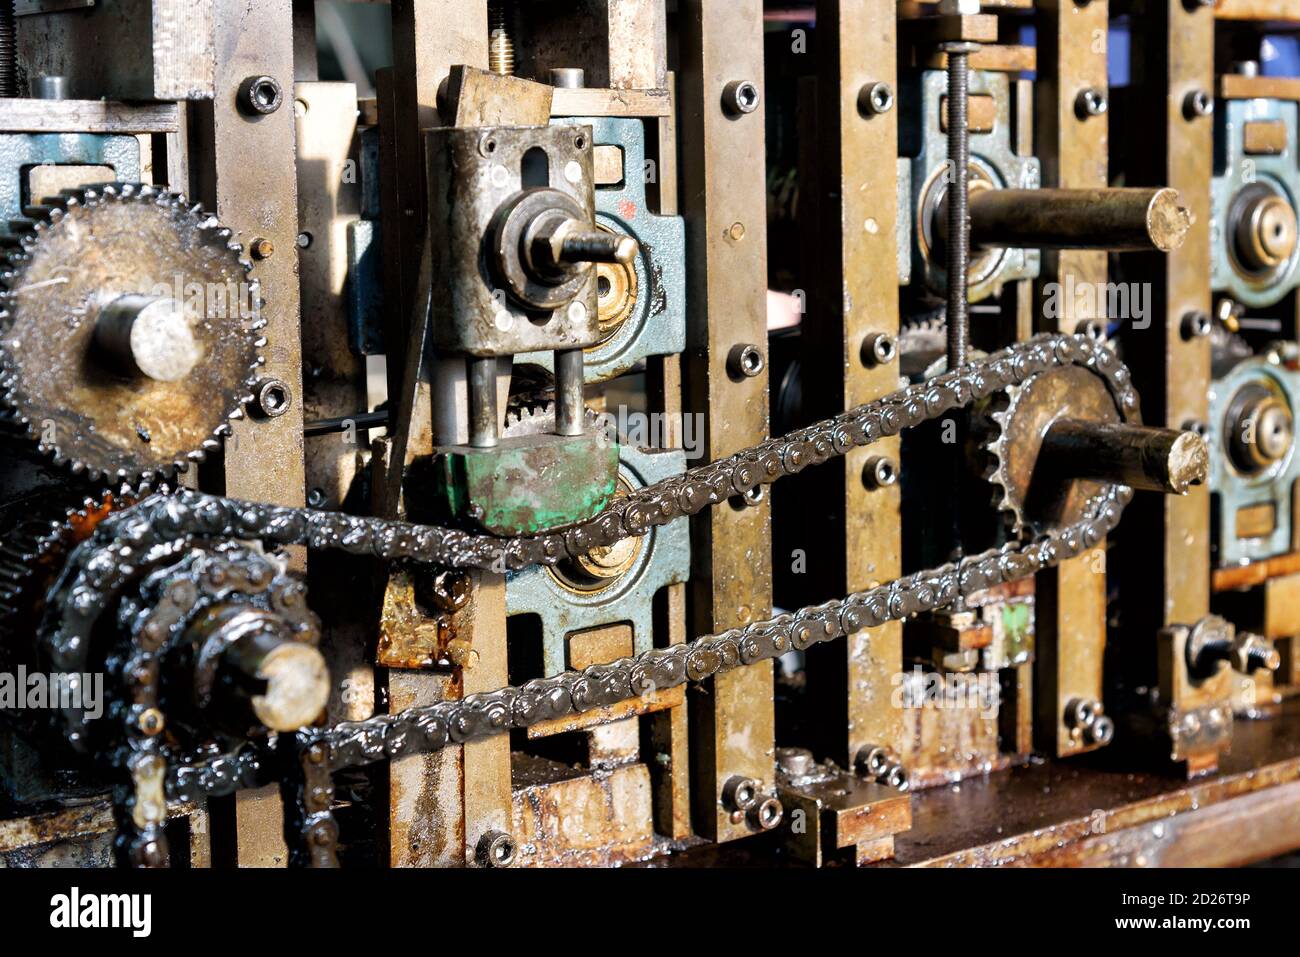 Close up on the drive chain of industrial machinery showing the chain and gears for transmission of power Stock Photo